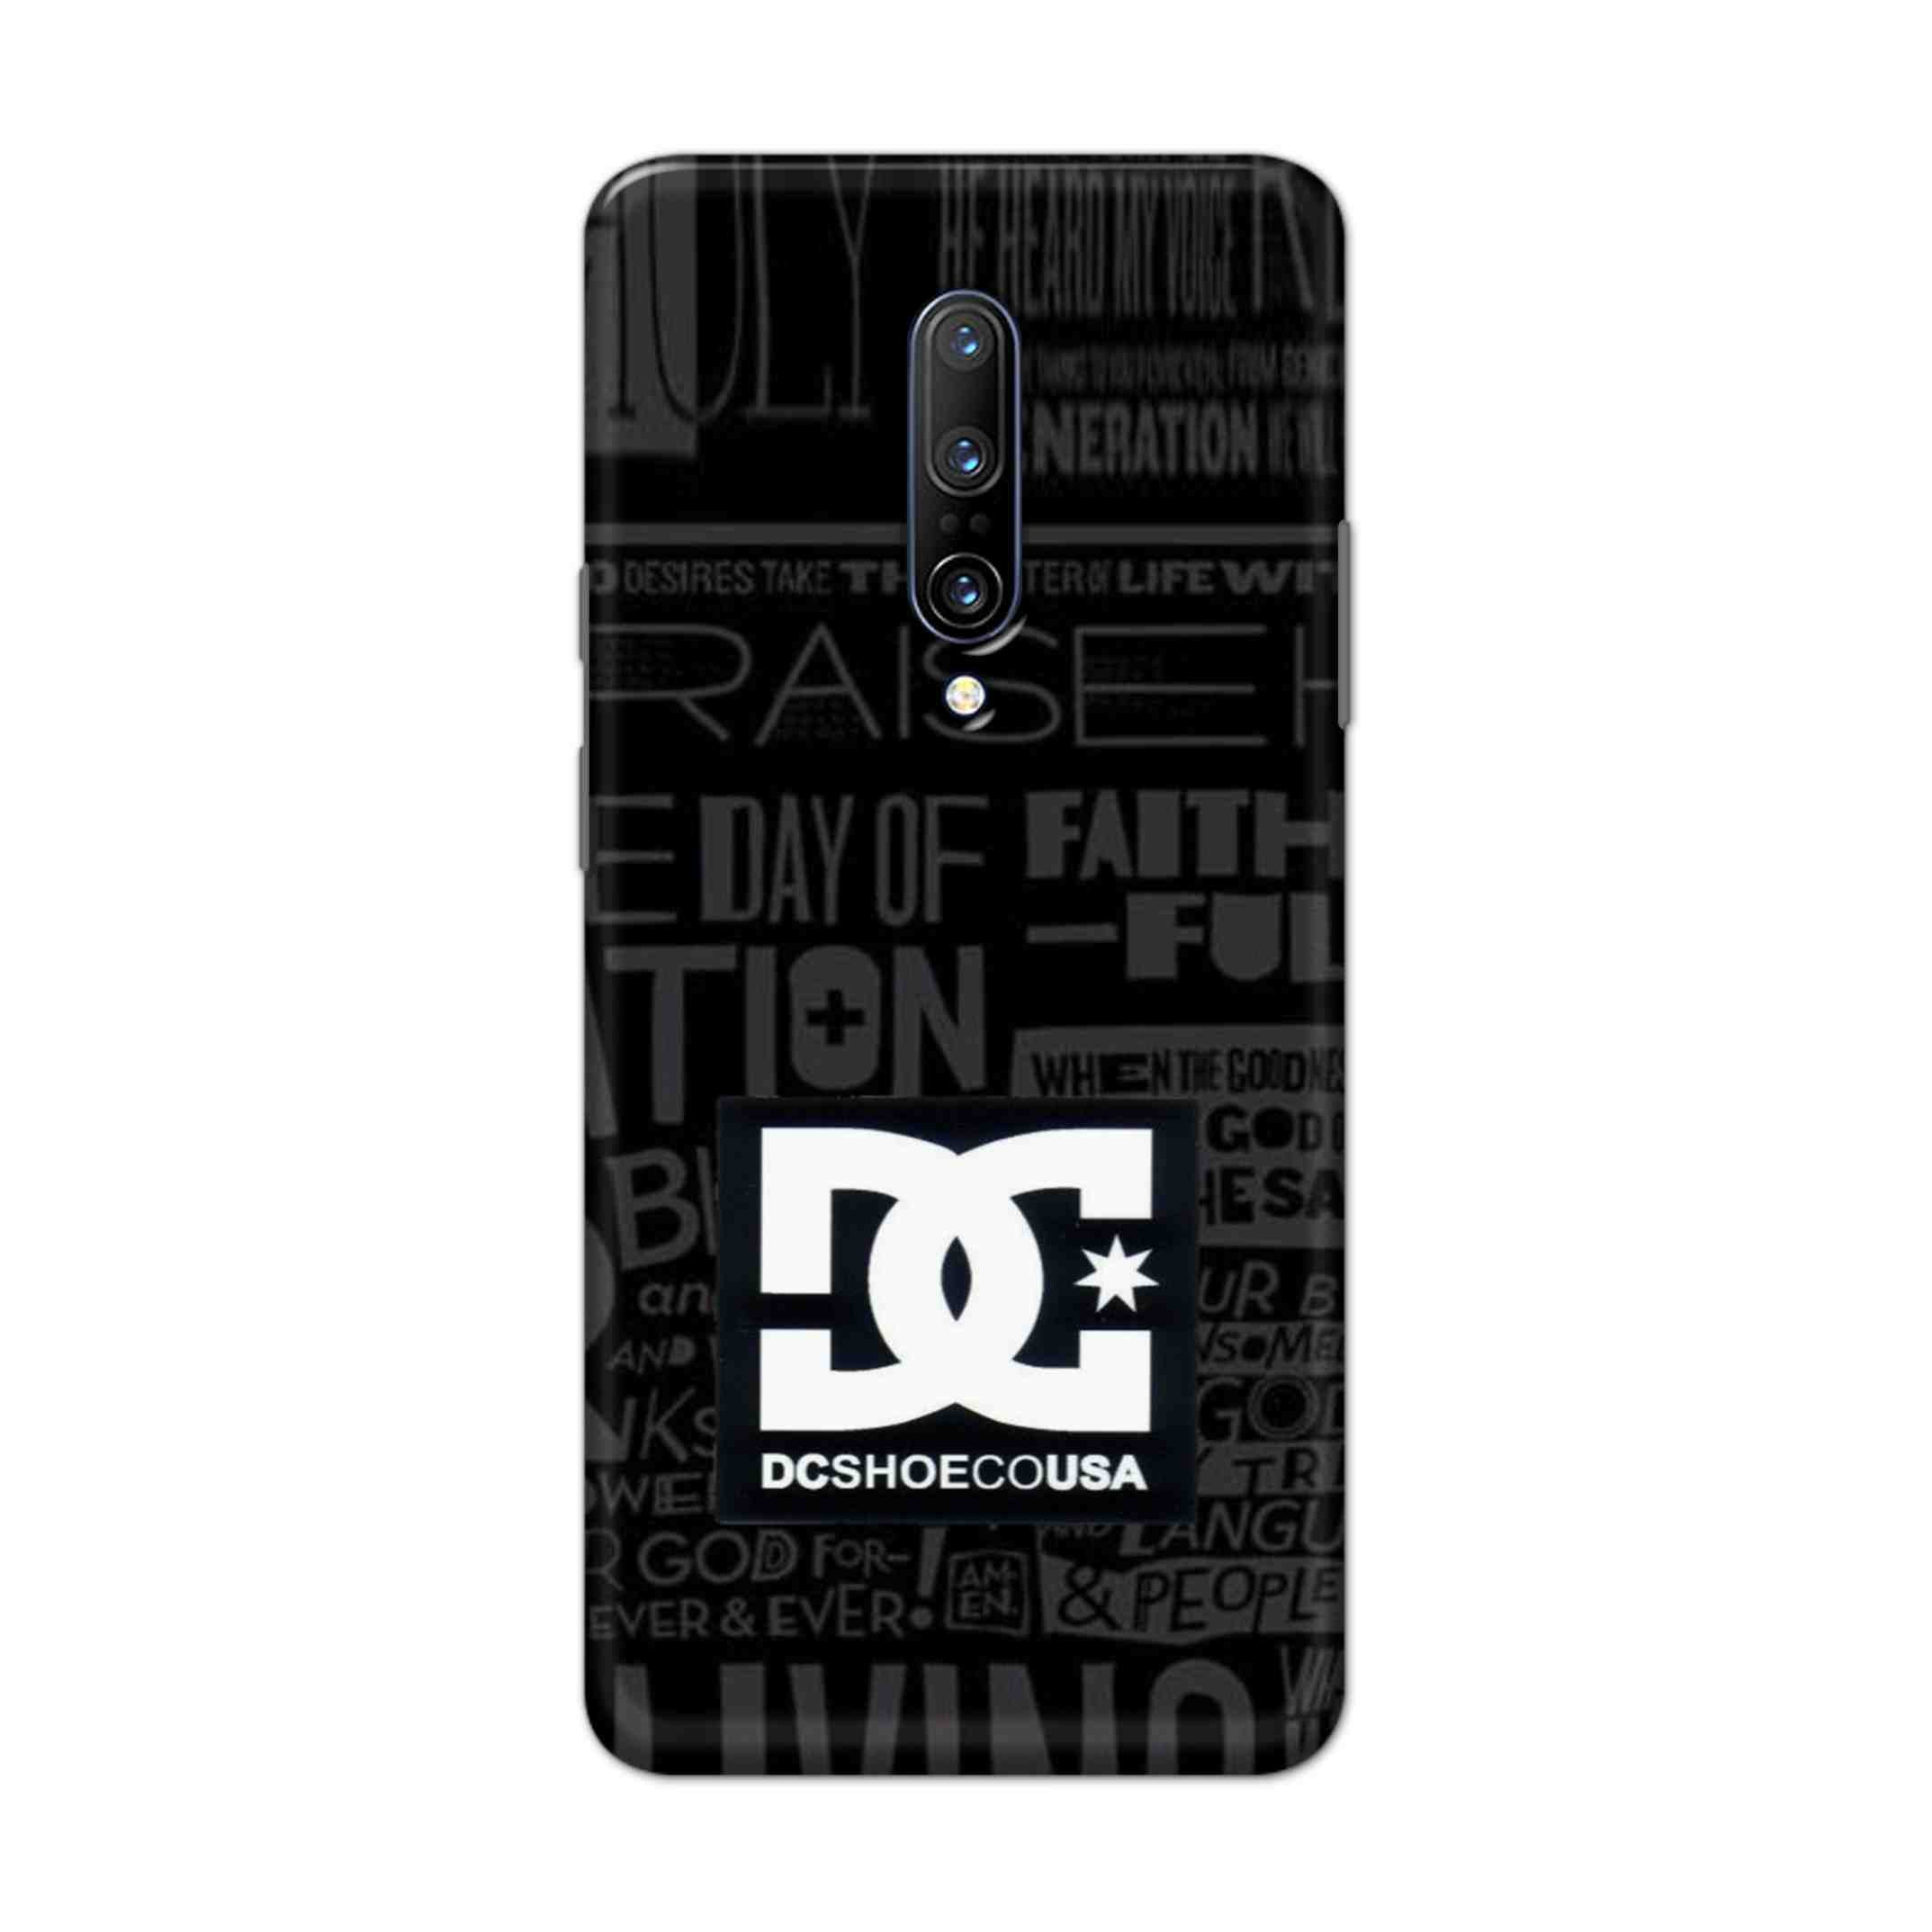 Buy Dc Shoecousa Hard Back Mobile Phone Case Cover For OnePlus 7 Pro Online